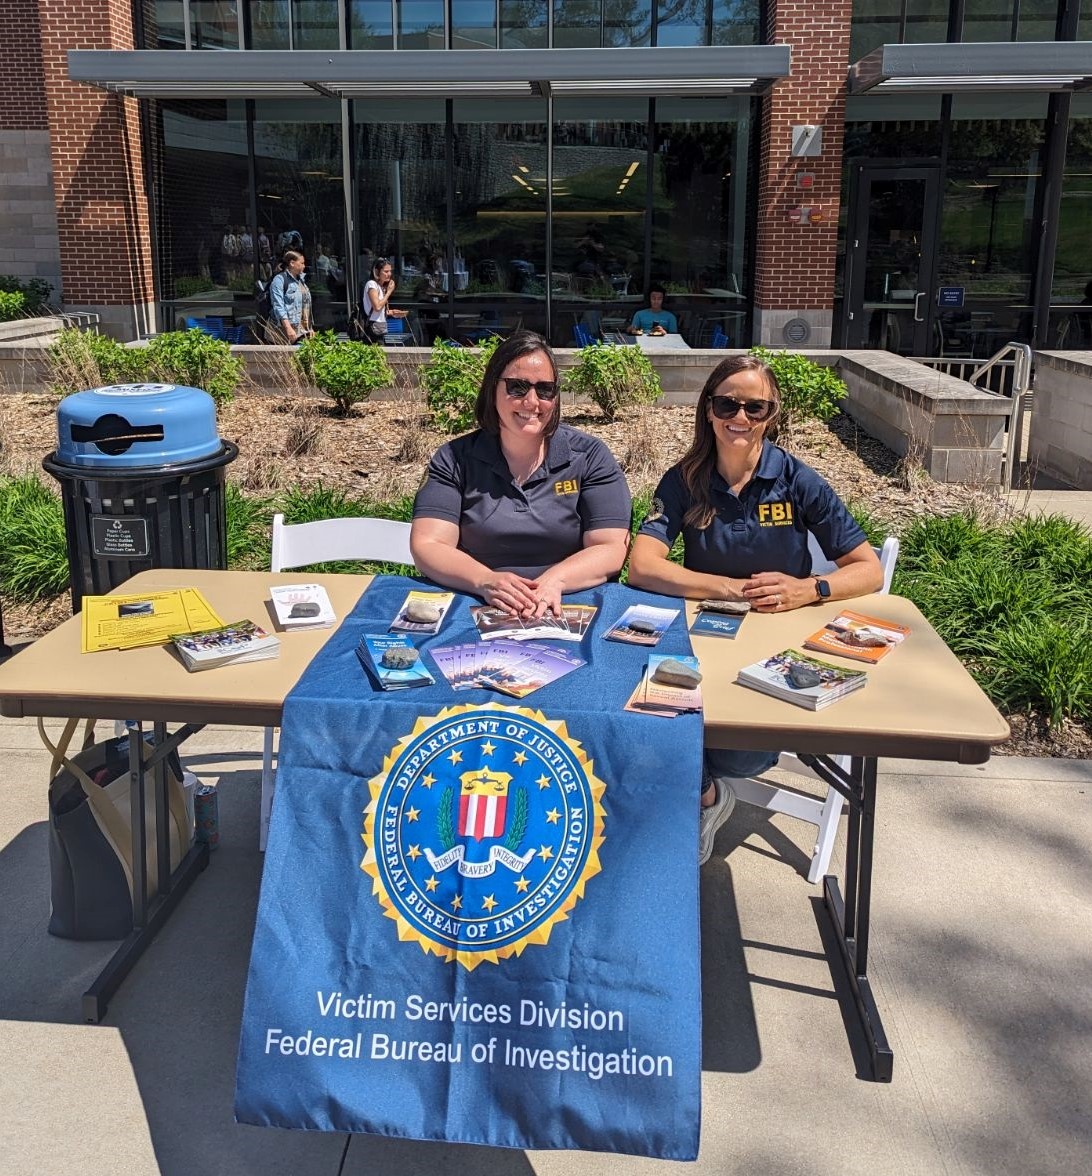 Today, #FBILouisville Victim Services and Community Outreach participated in the Sexual Violence Awareness and Prevention Resource Fair at @universityofky in partnership with the @UKPolice and the UK Violence Intervention Program Center.